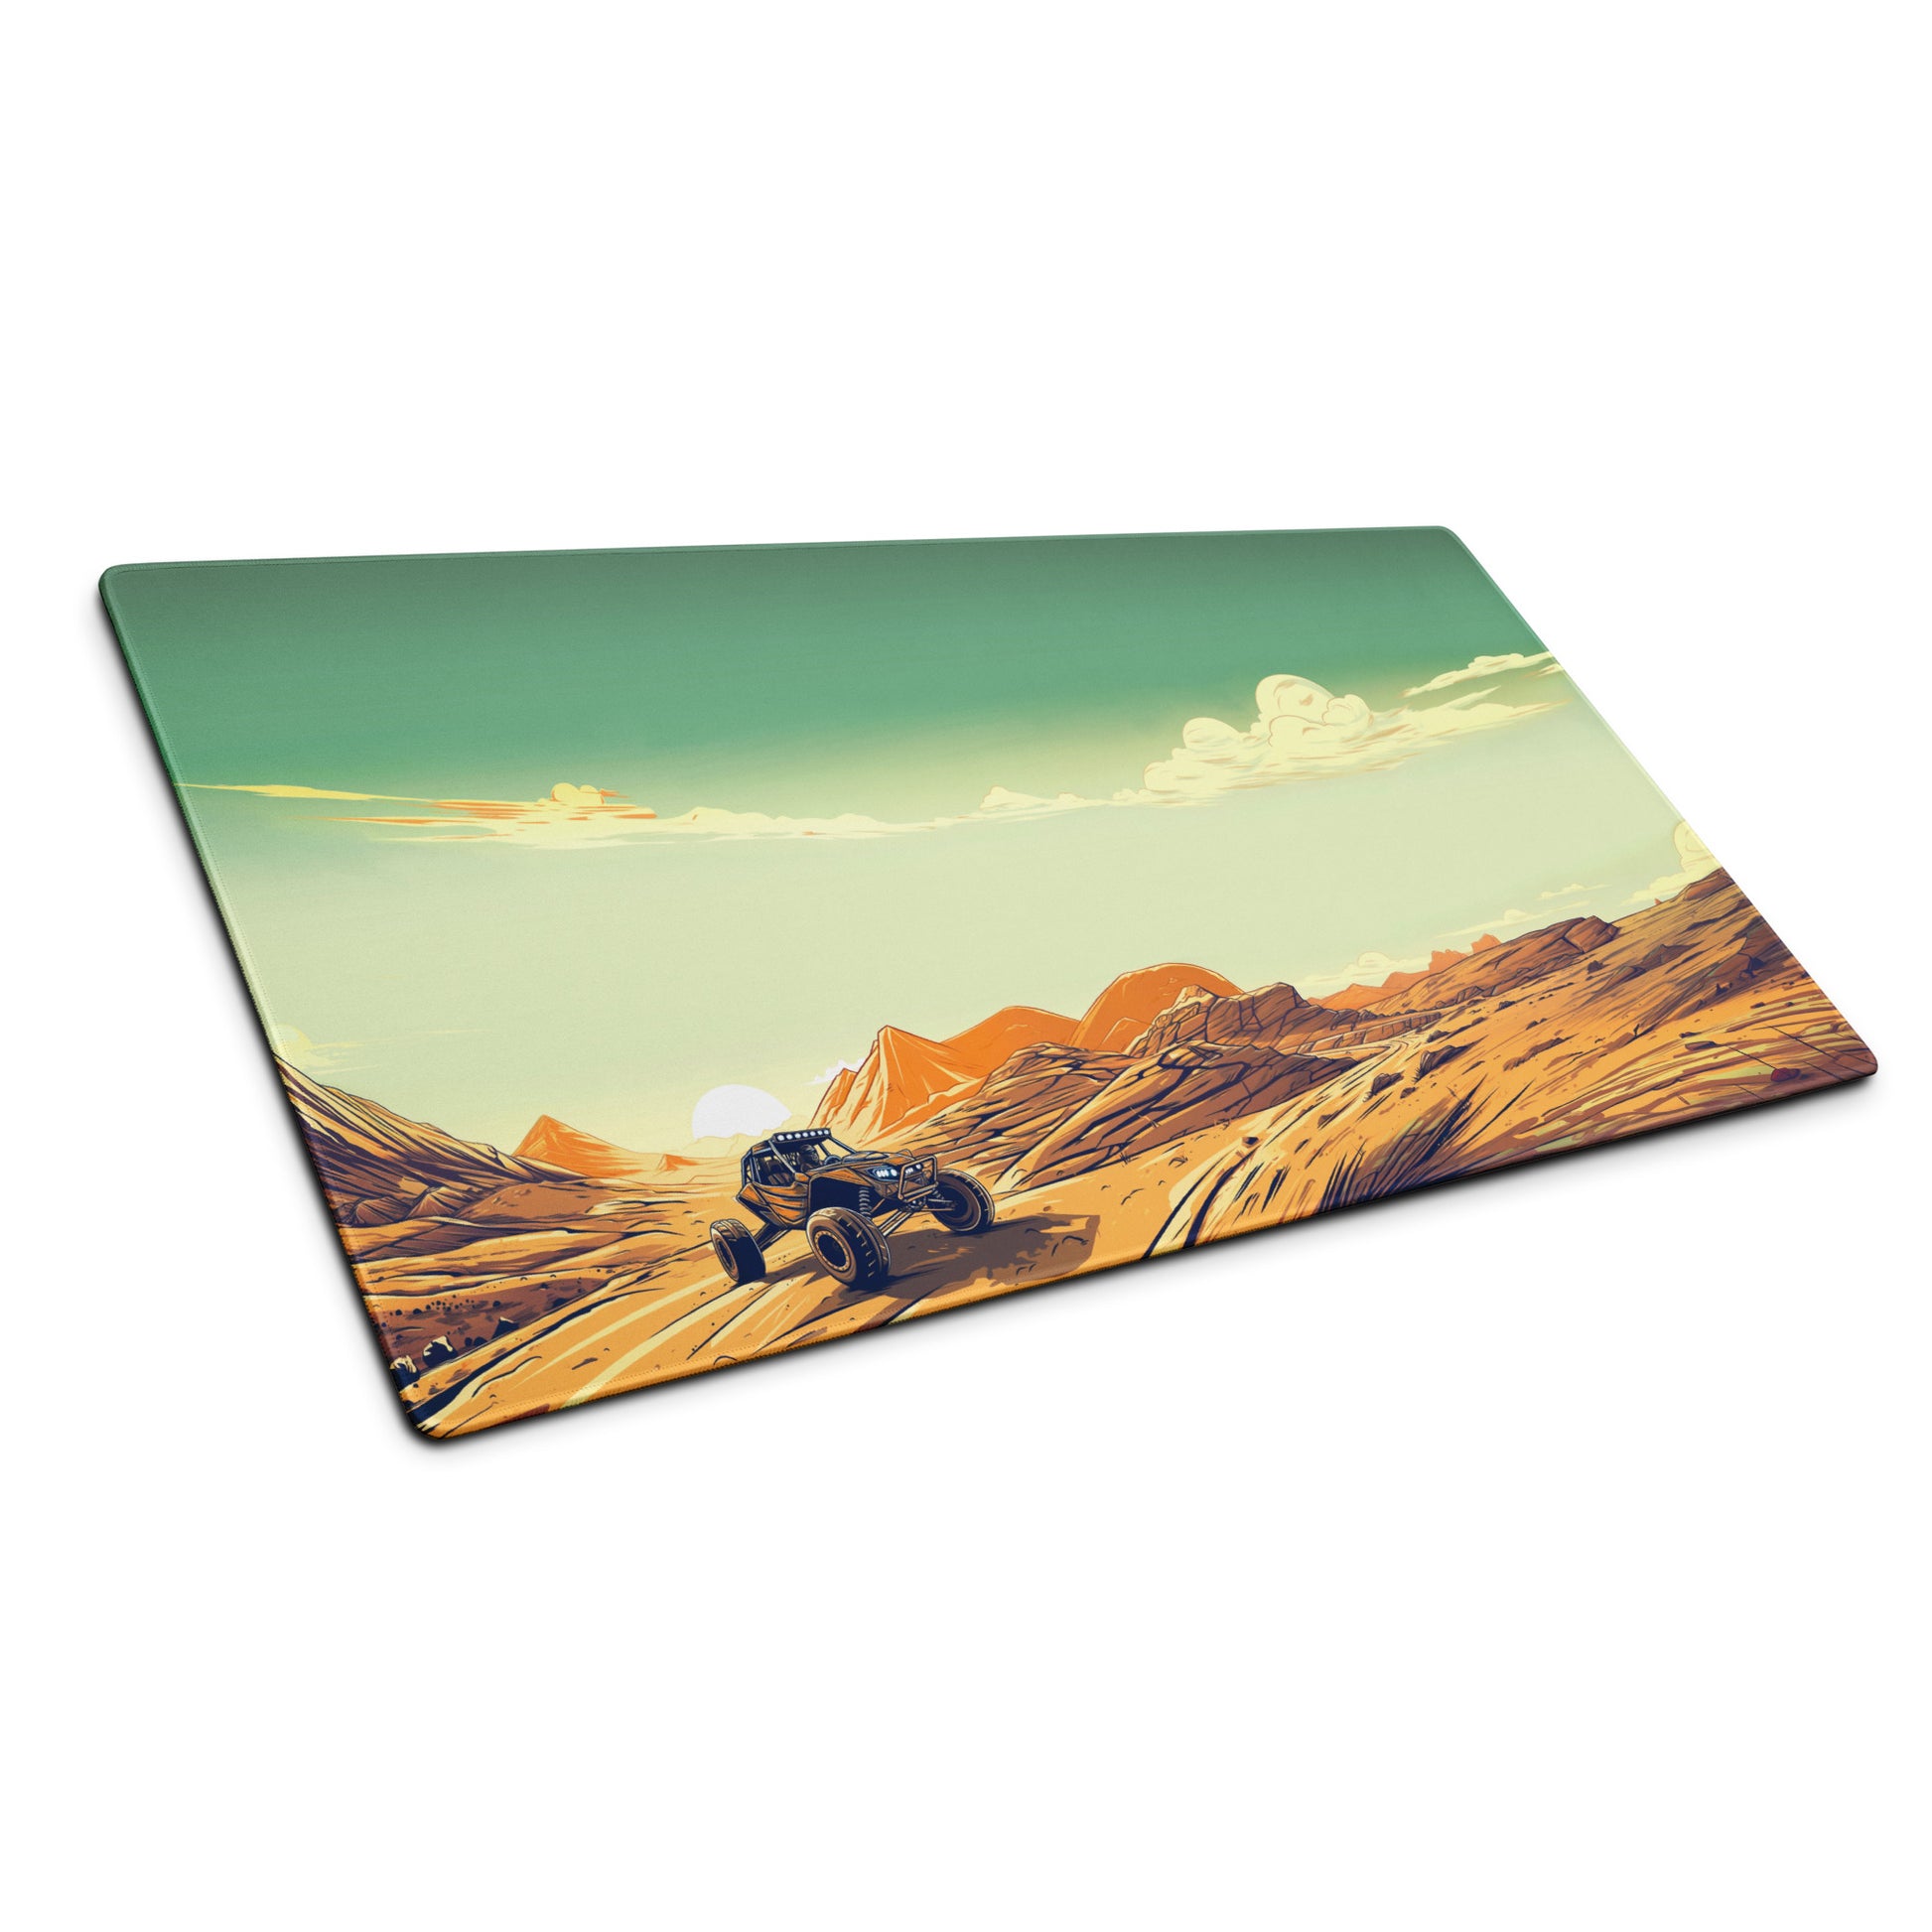 A 36" x 18" desk pad with a dune buggy in a desert landscape sitting at an angle.